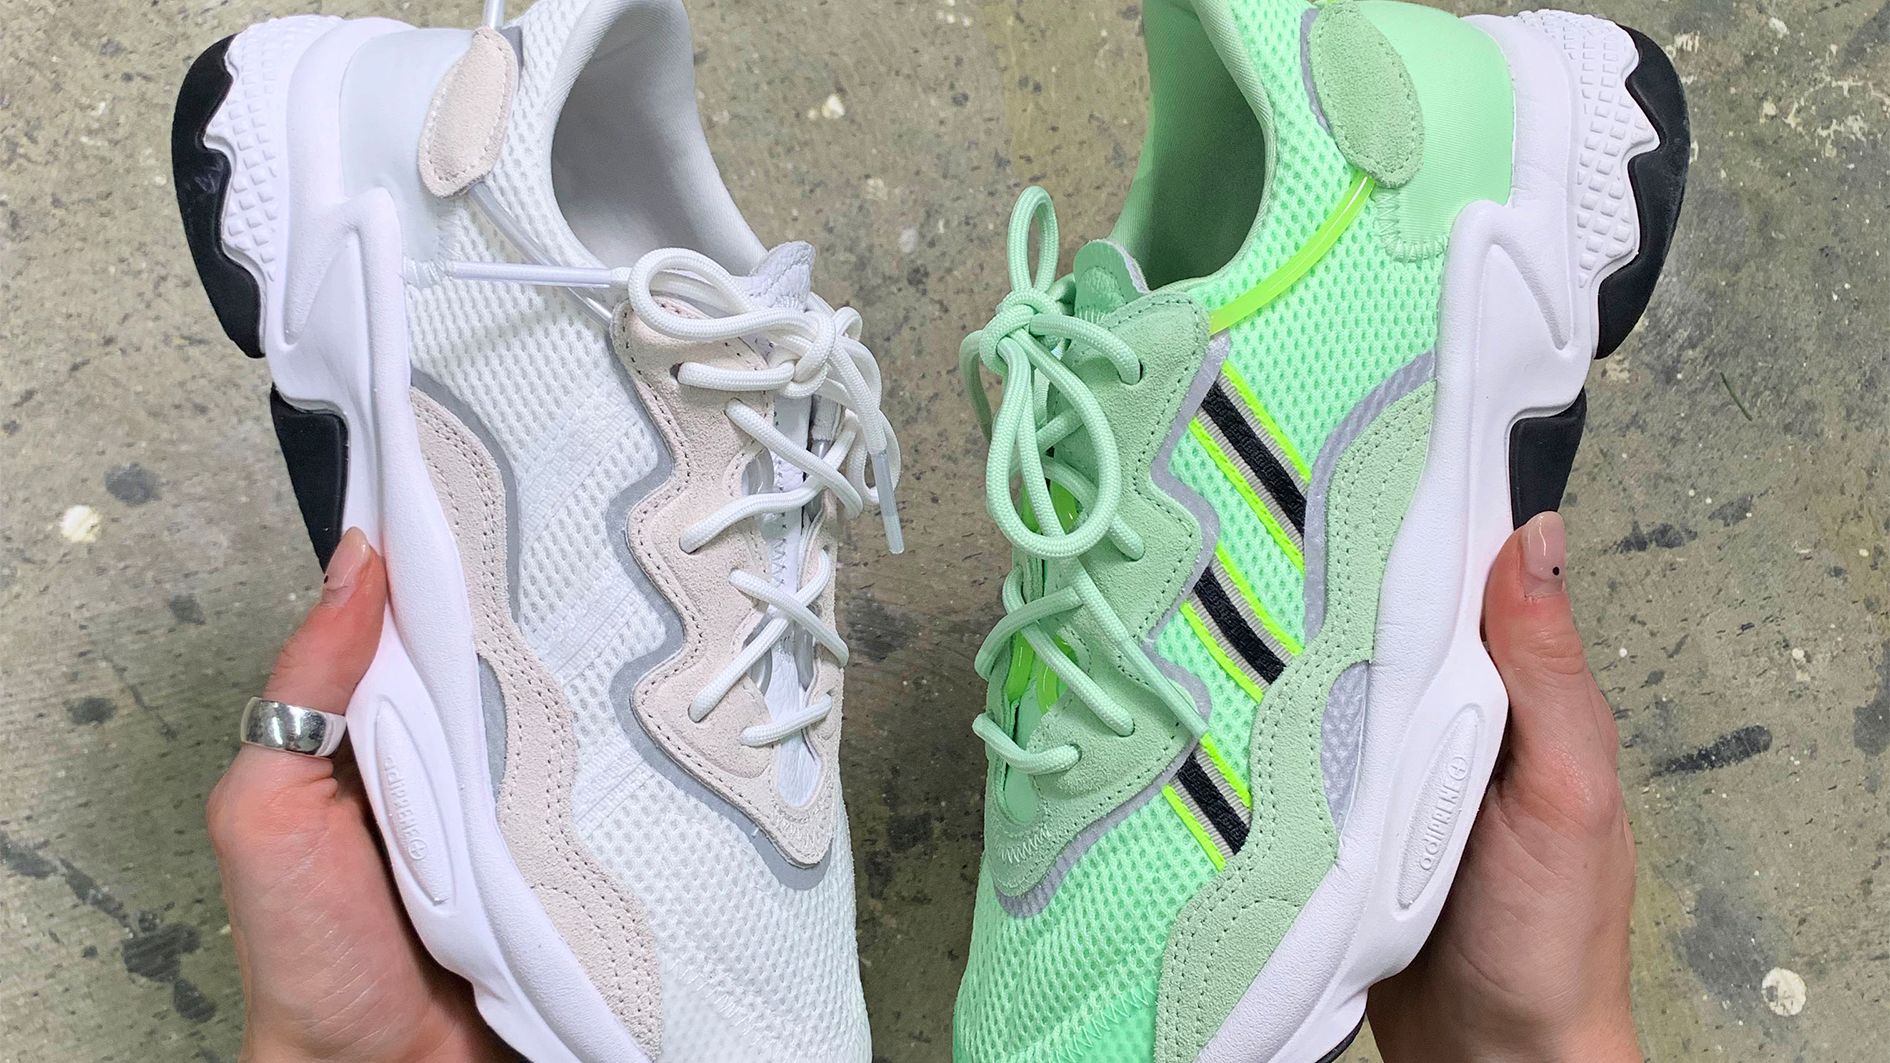 adidas Ozweego Sizing: How Do They | The Sole Supplier